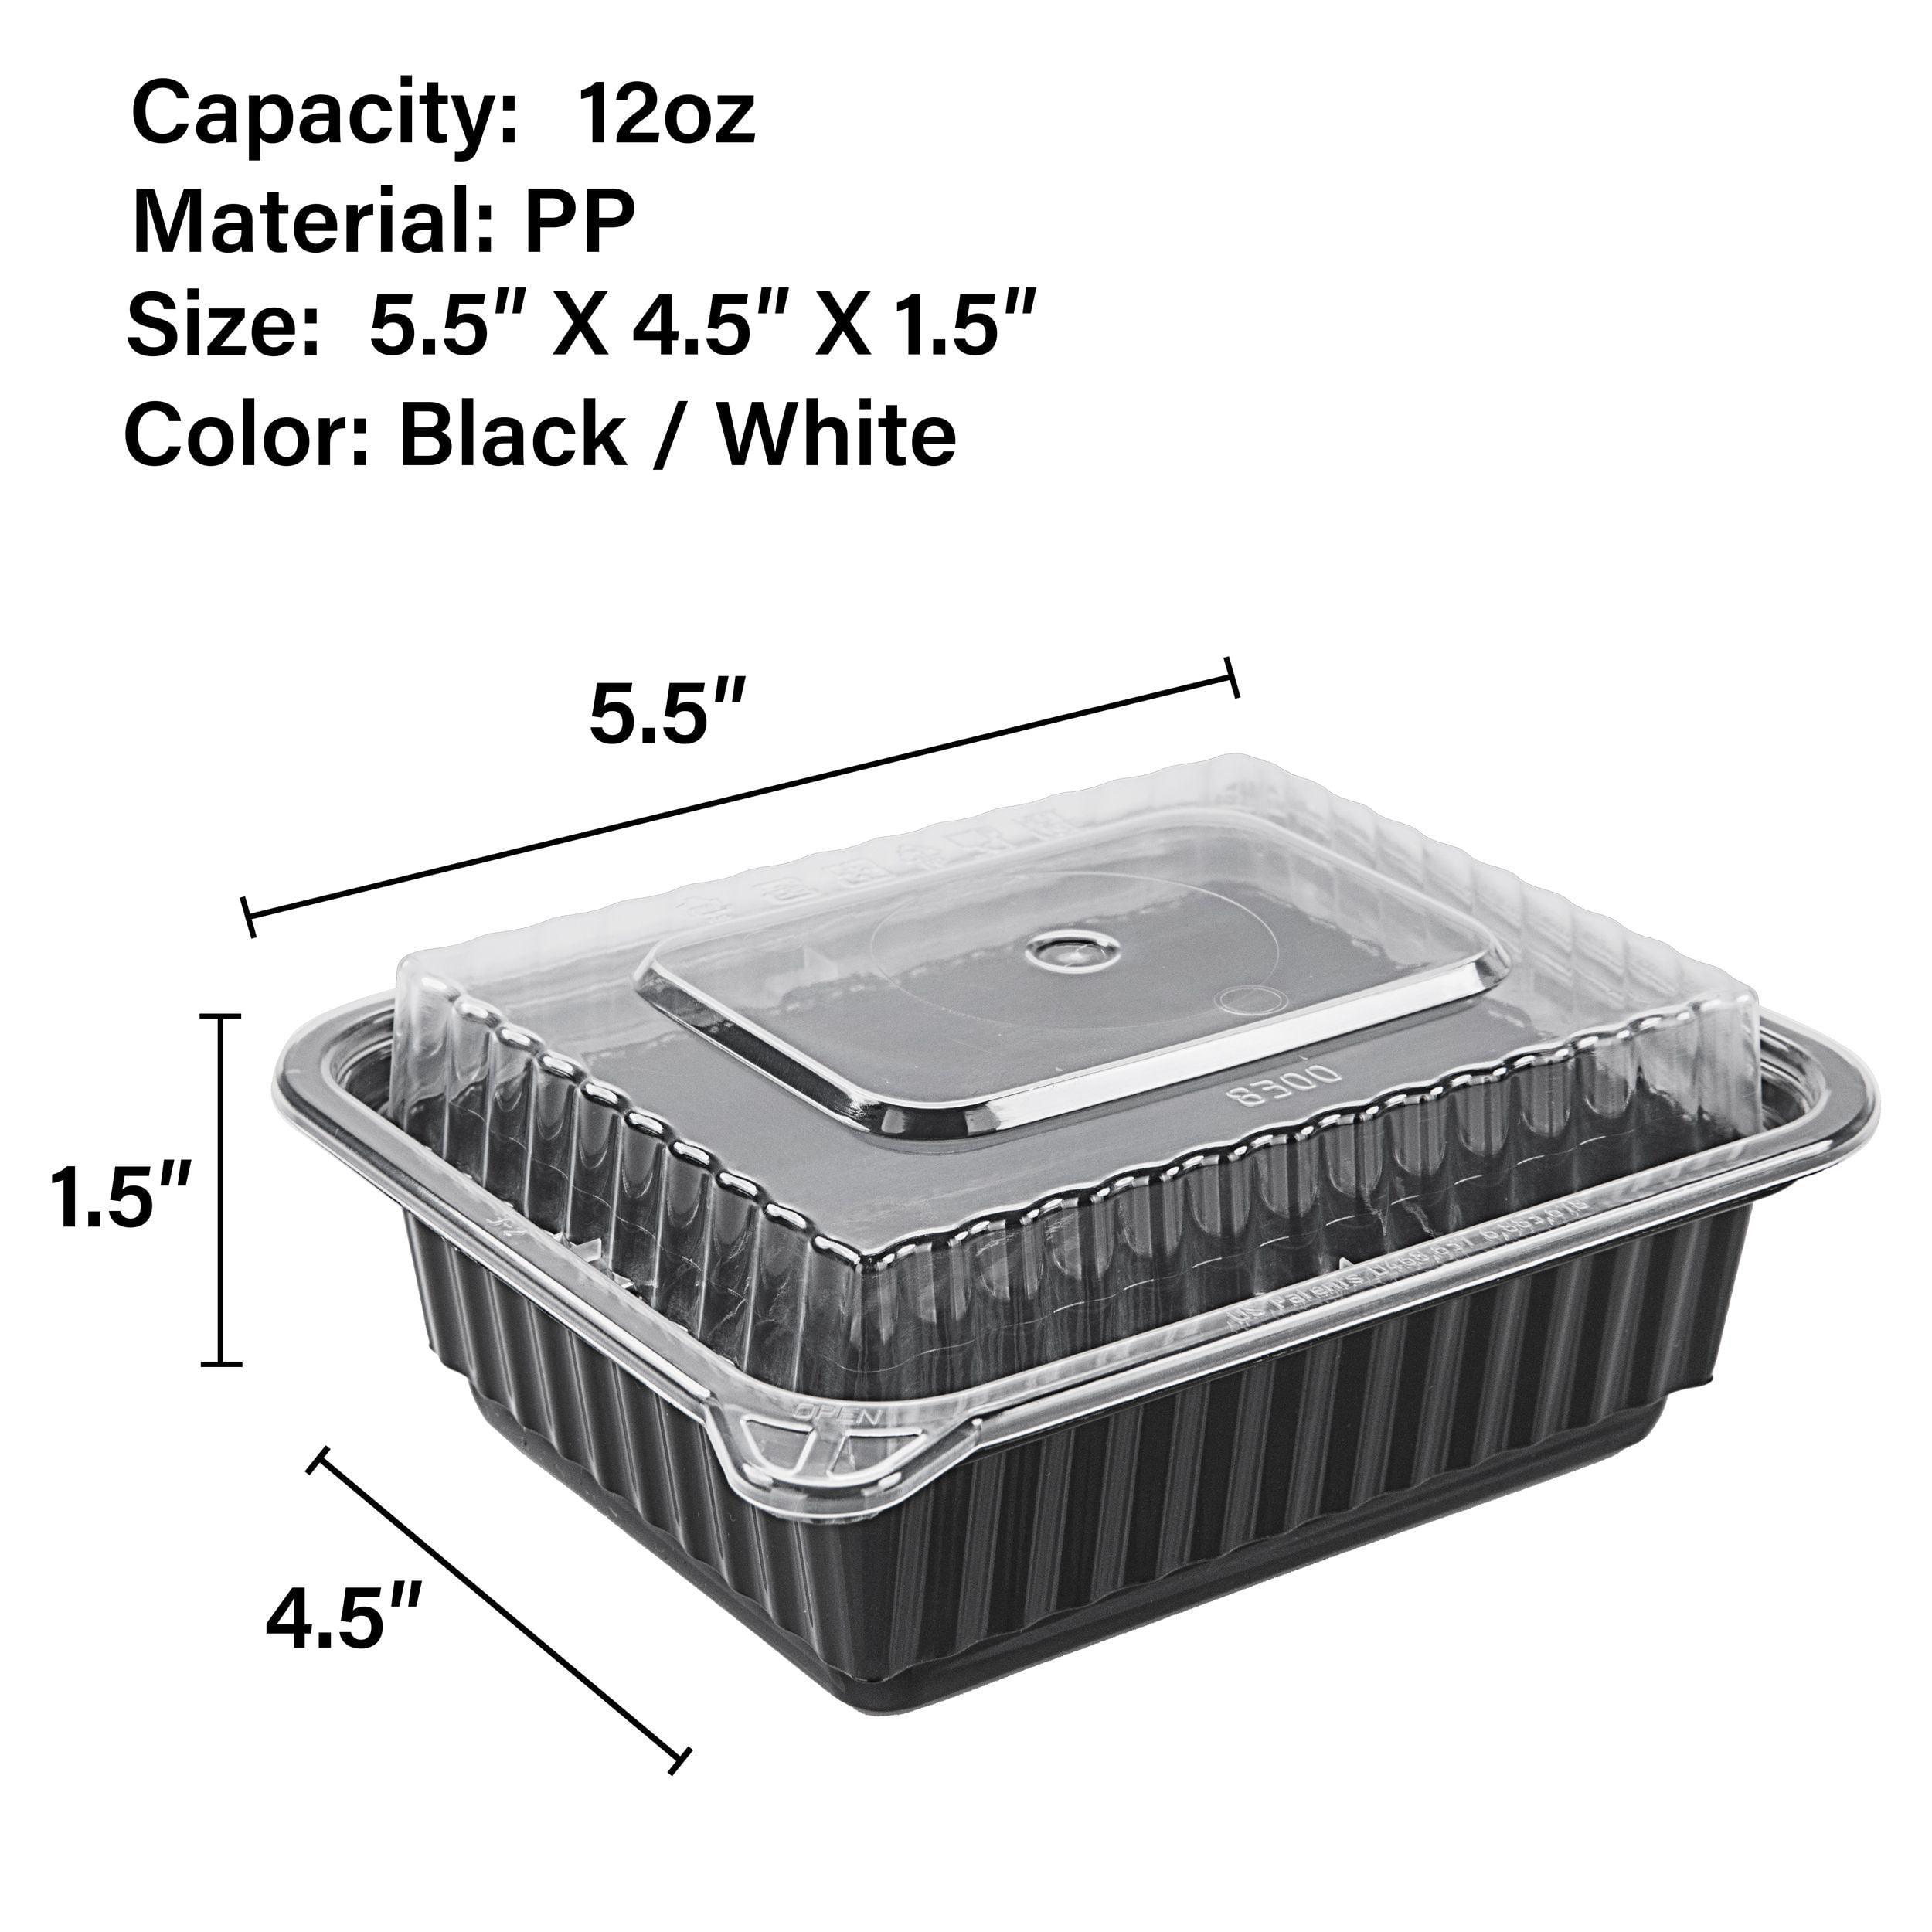 CTC-008] 1 Compartment Rectangular Meal Prep Container with Lids